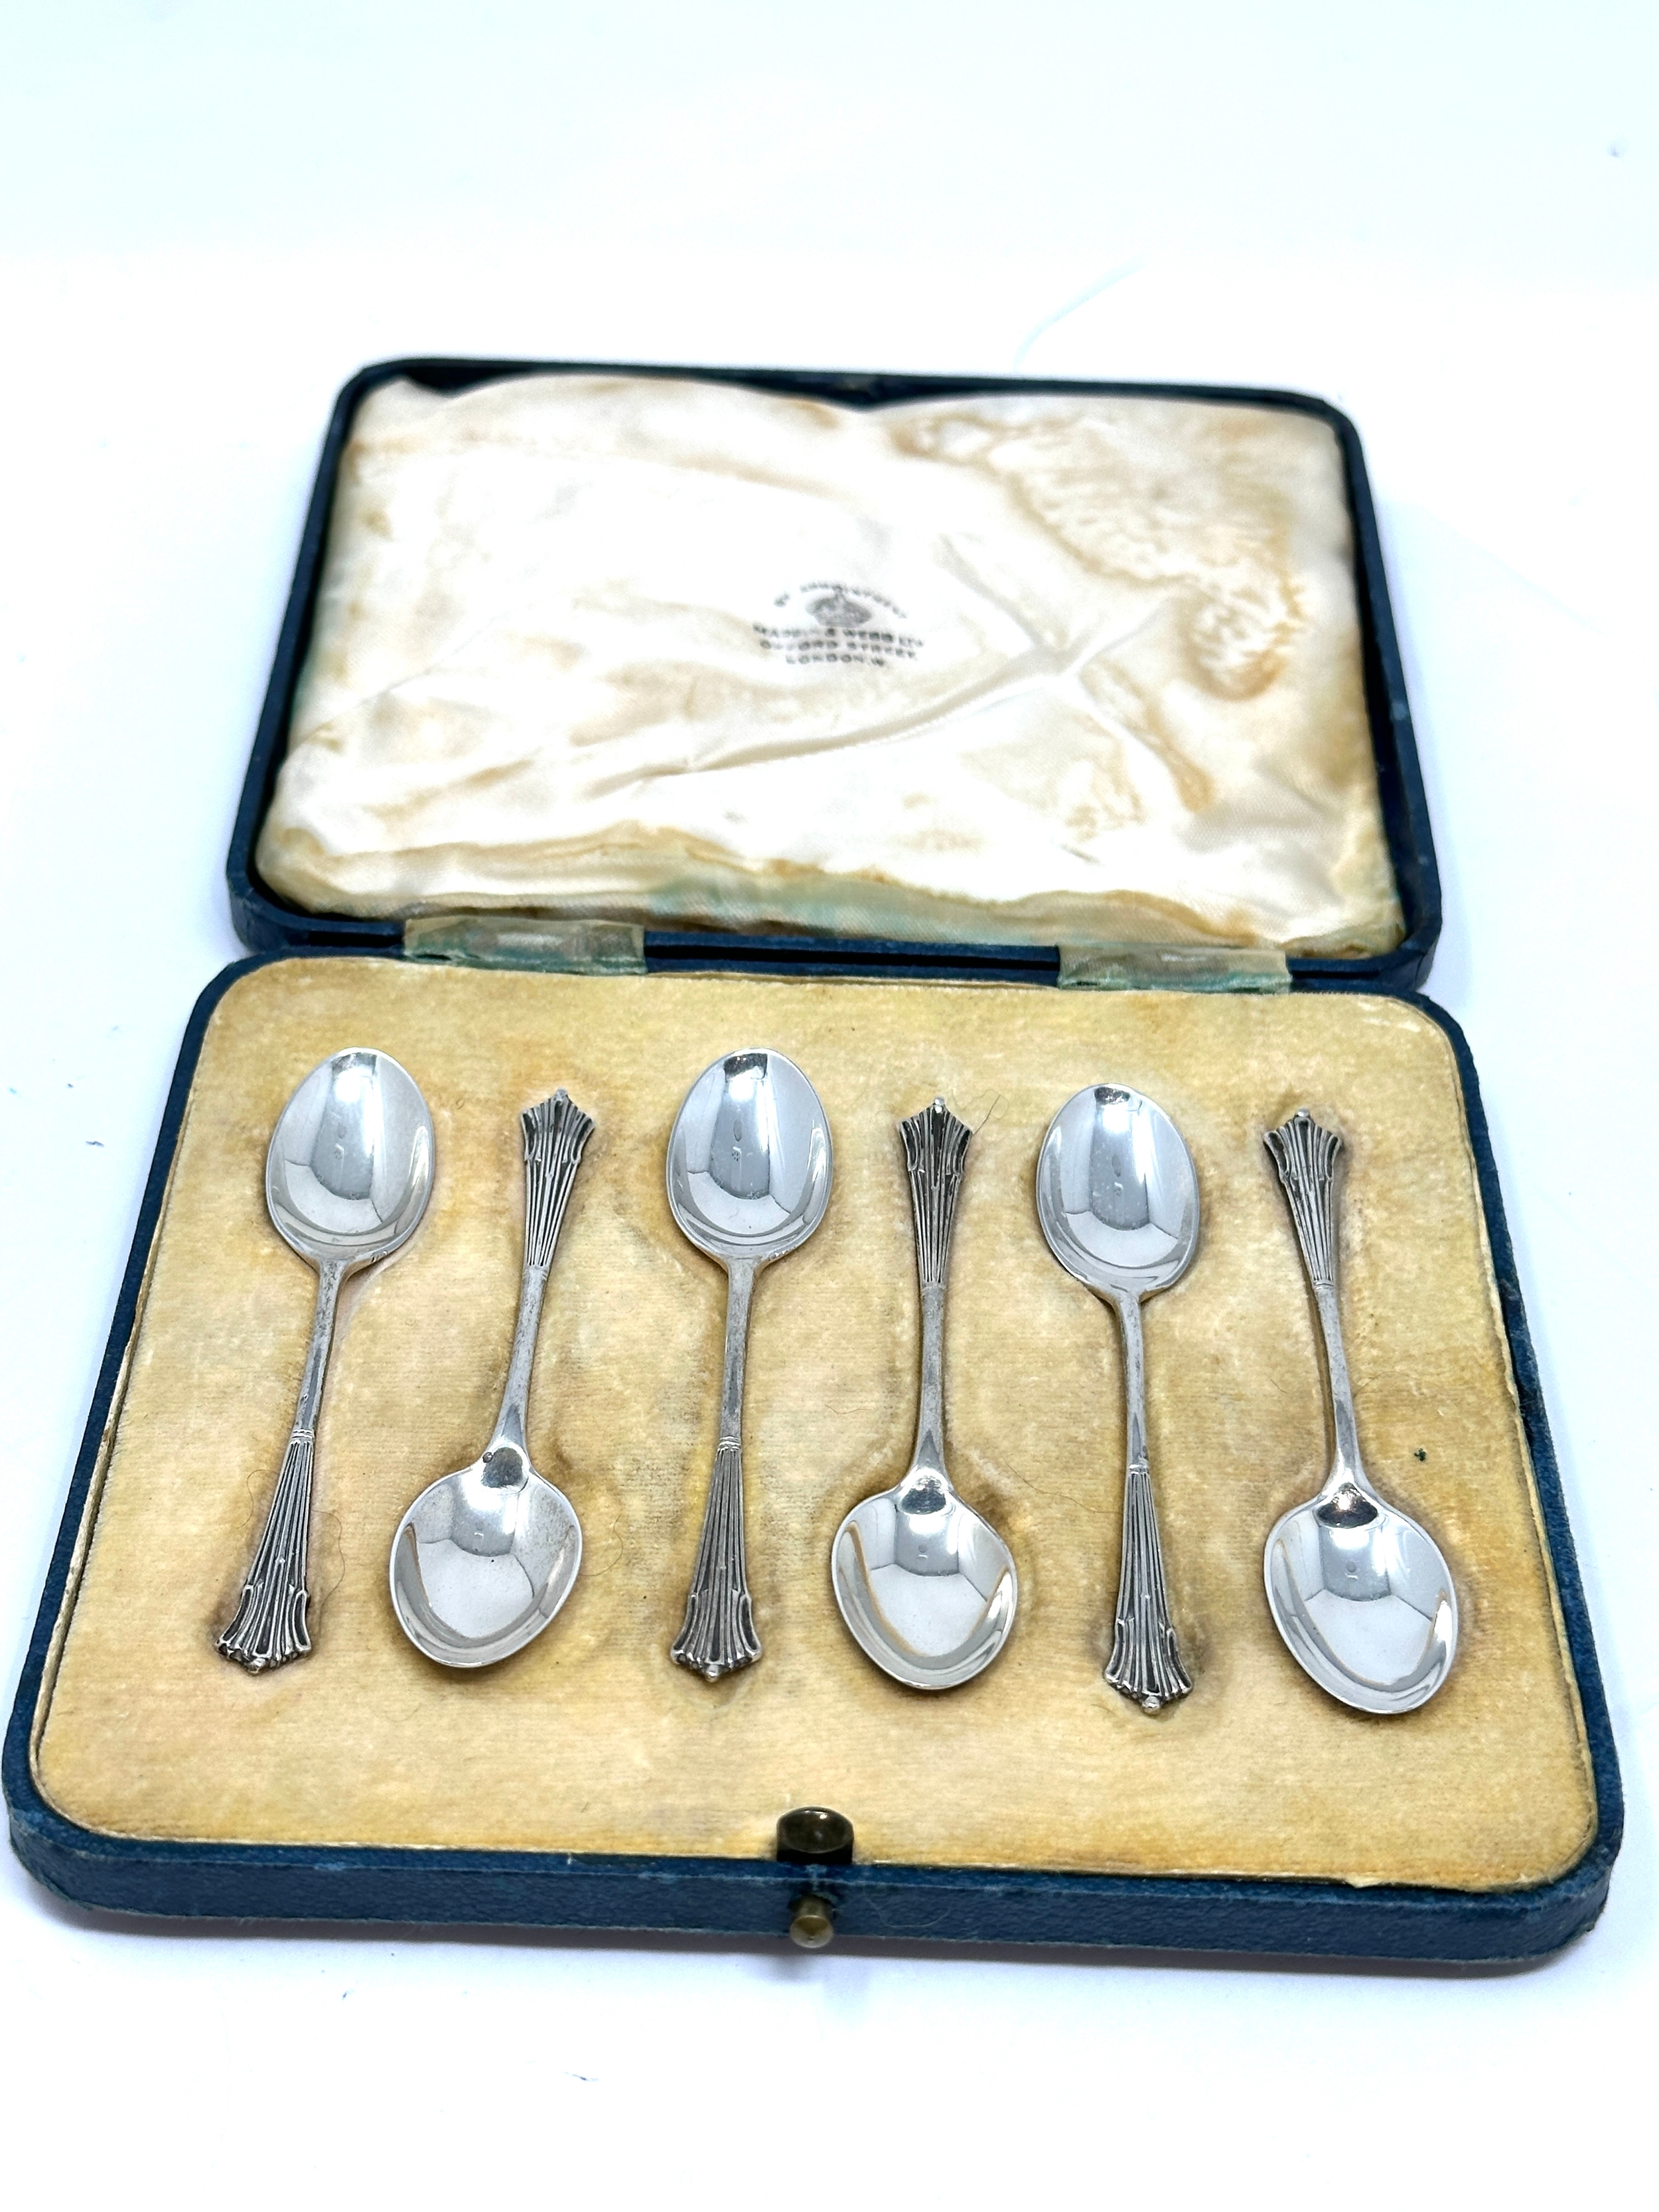 Boxed set of 6 silver tea spoons